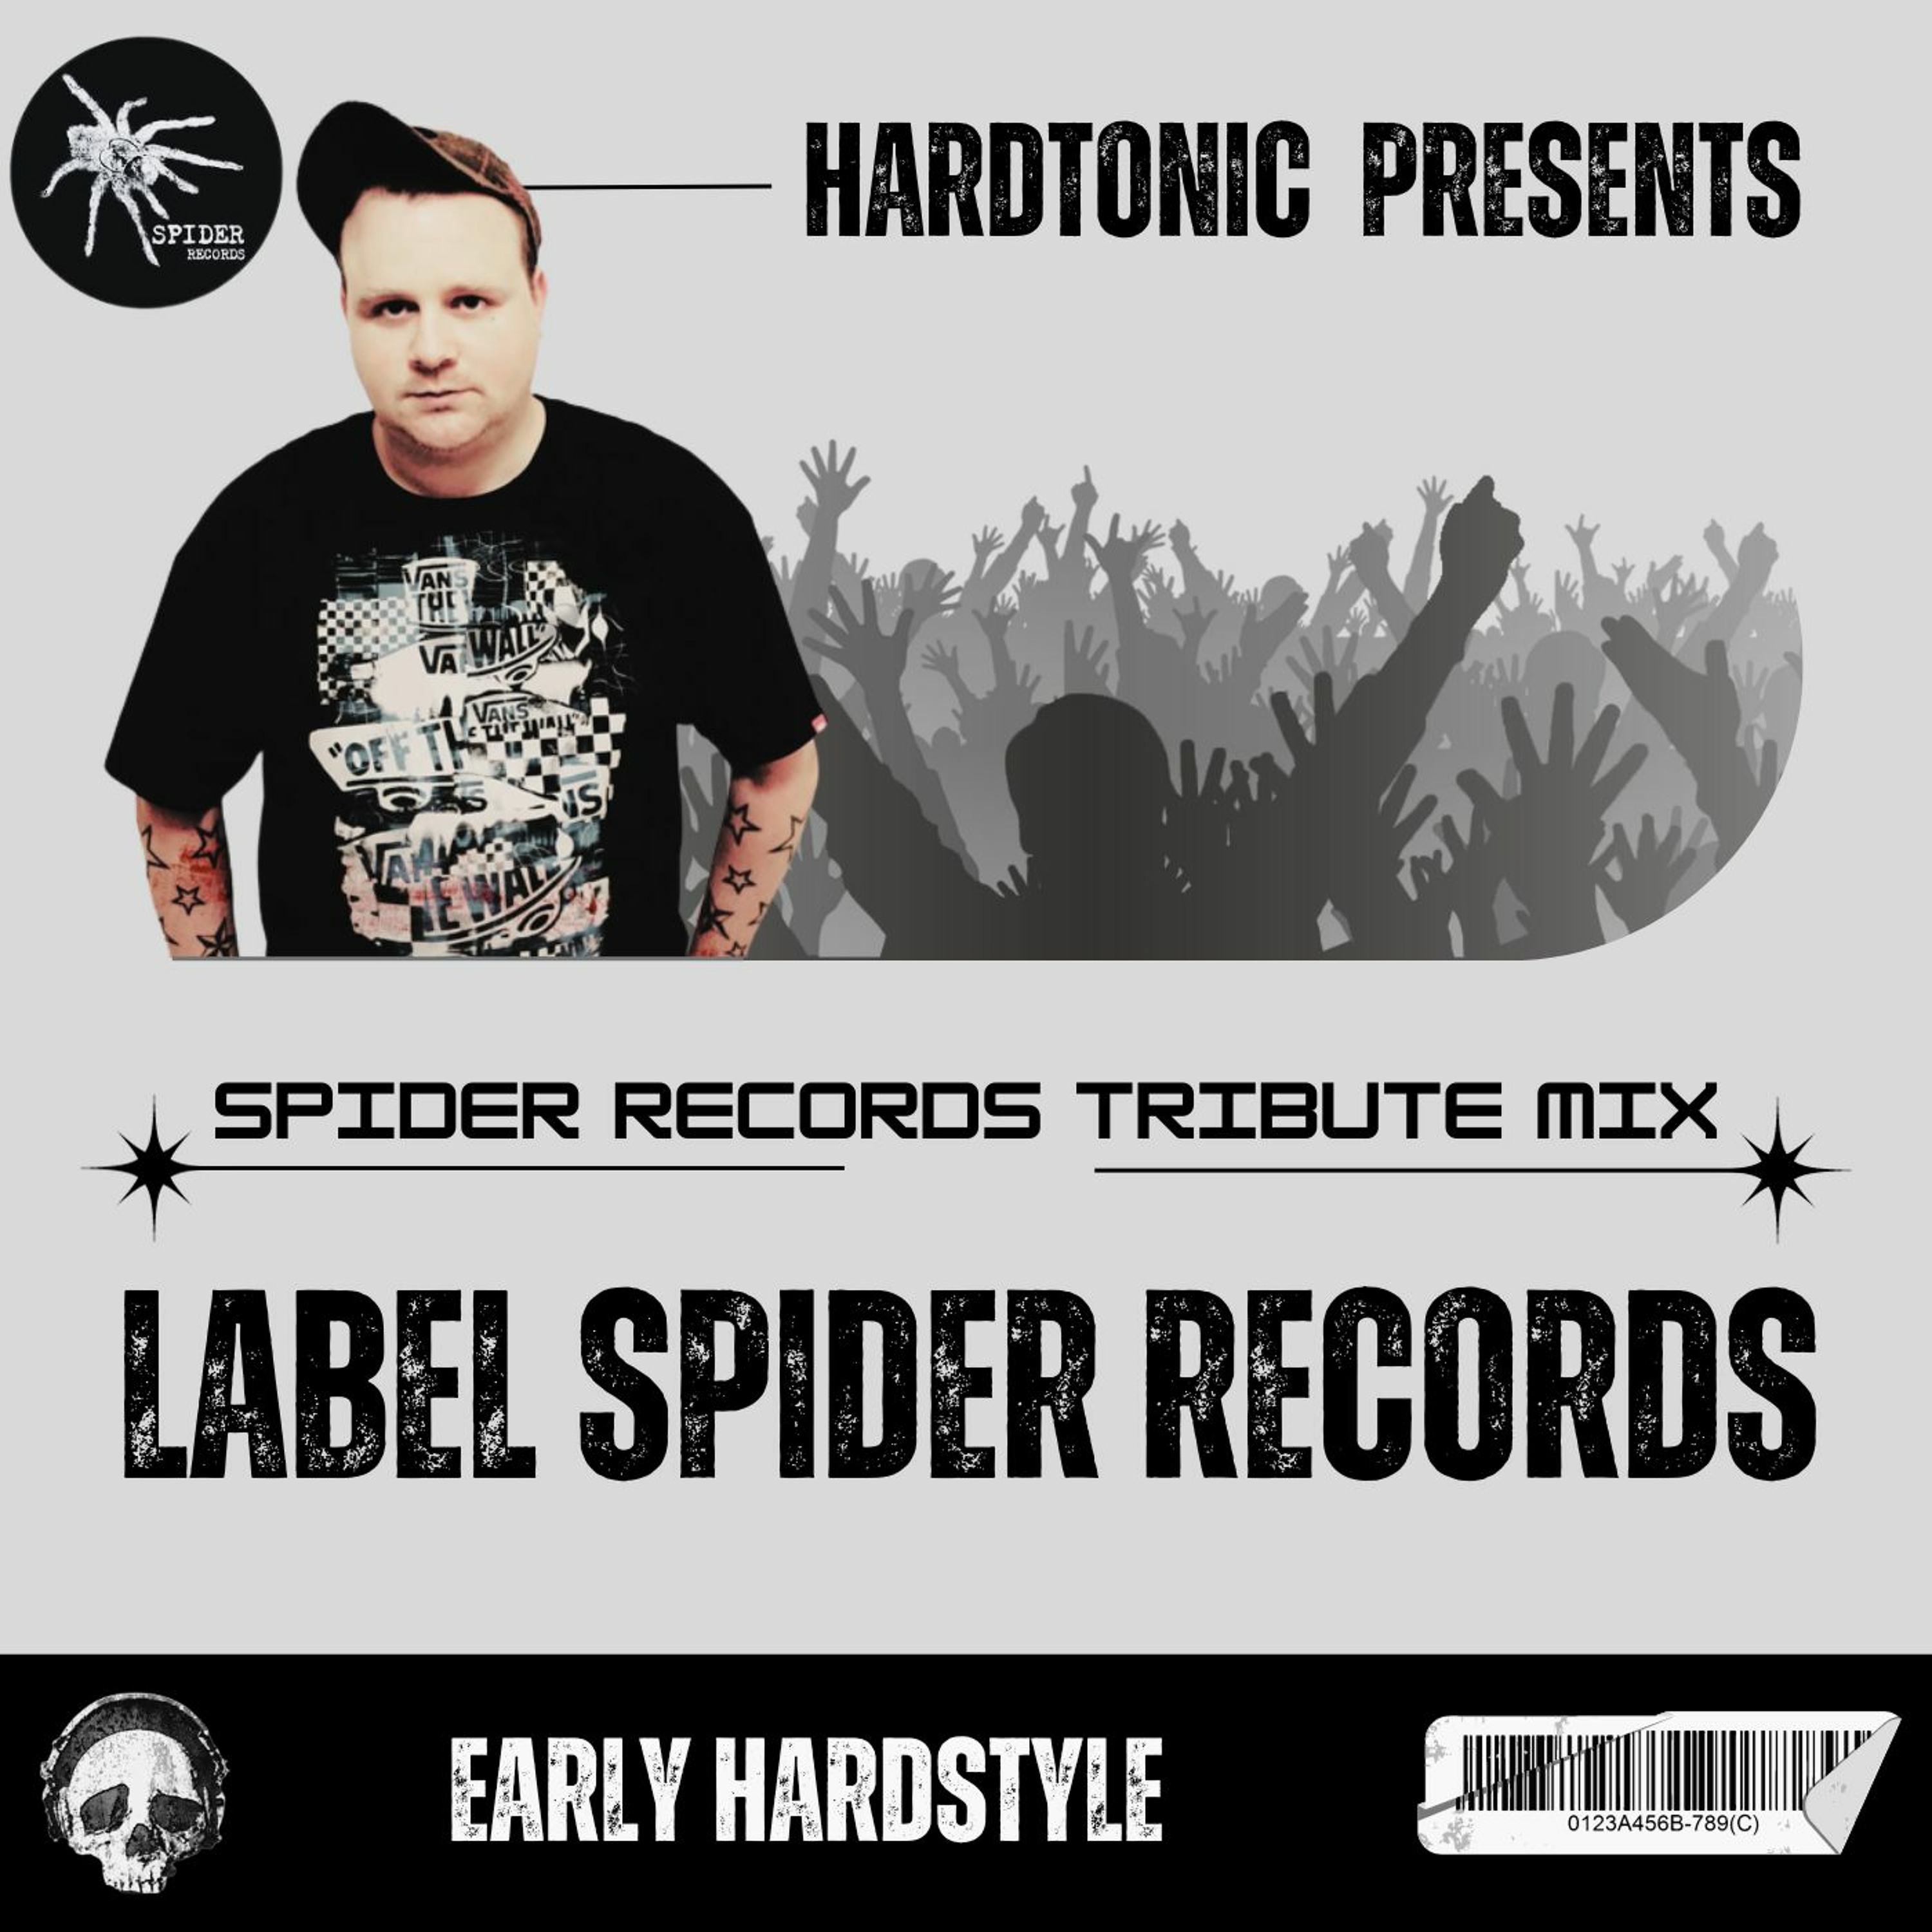 Hardtonic @ Spider Records Tribute Mix Early Hardstyle